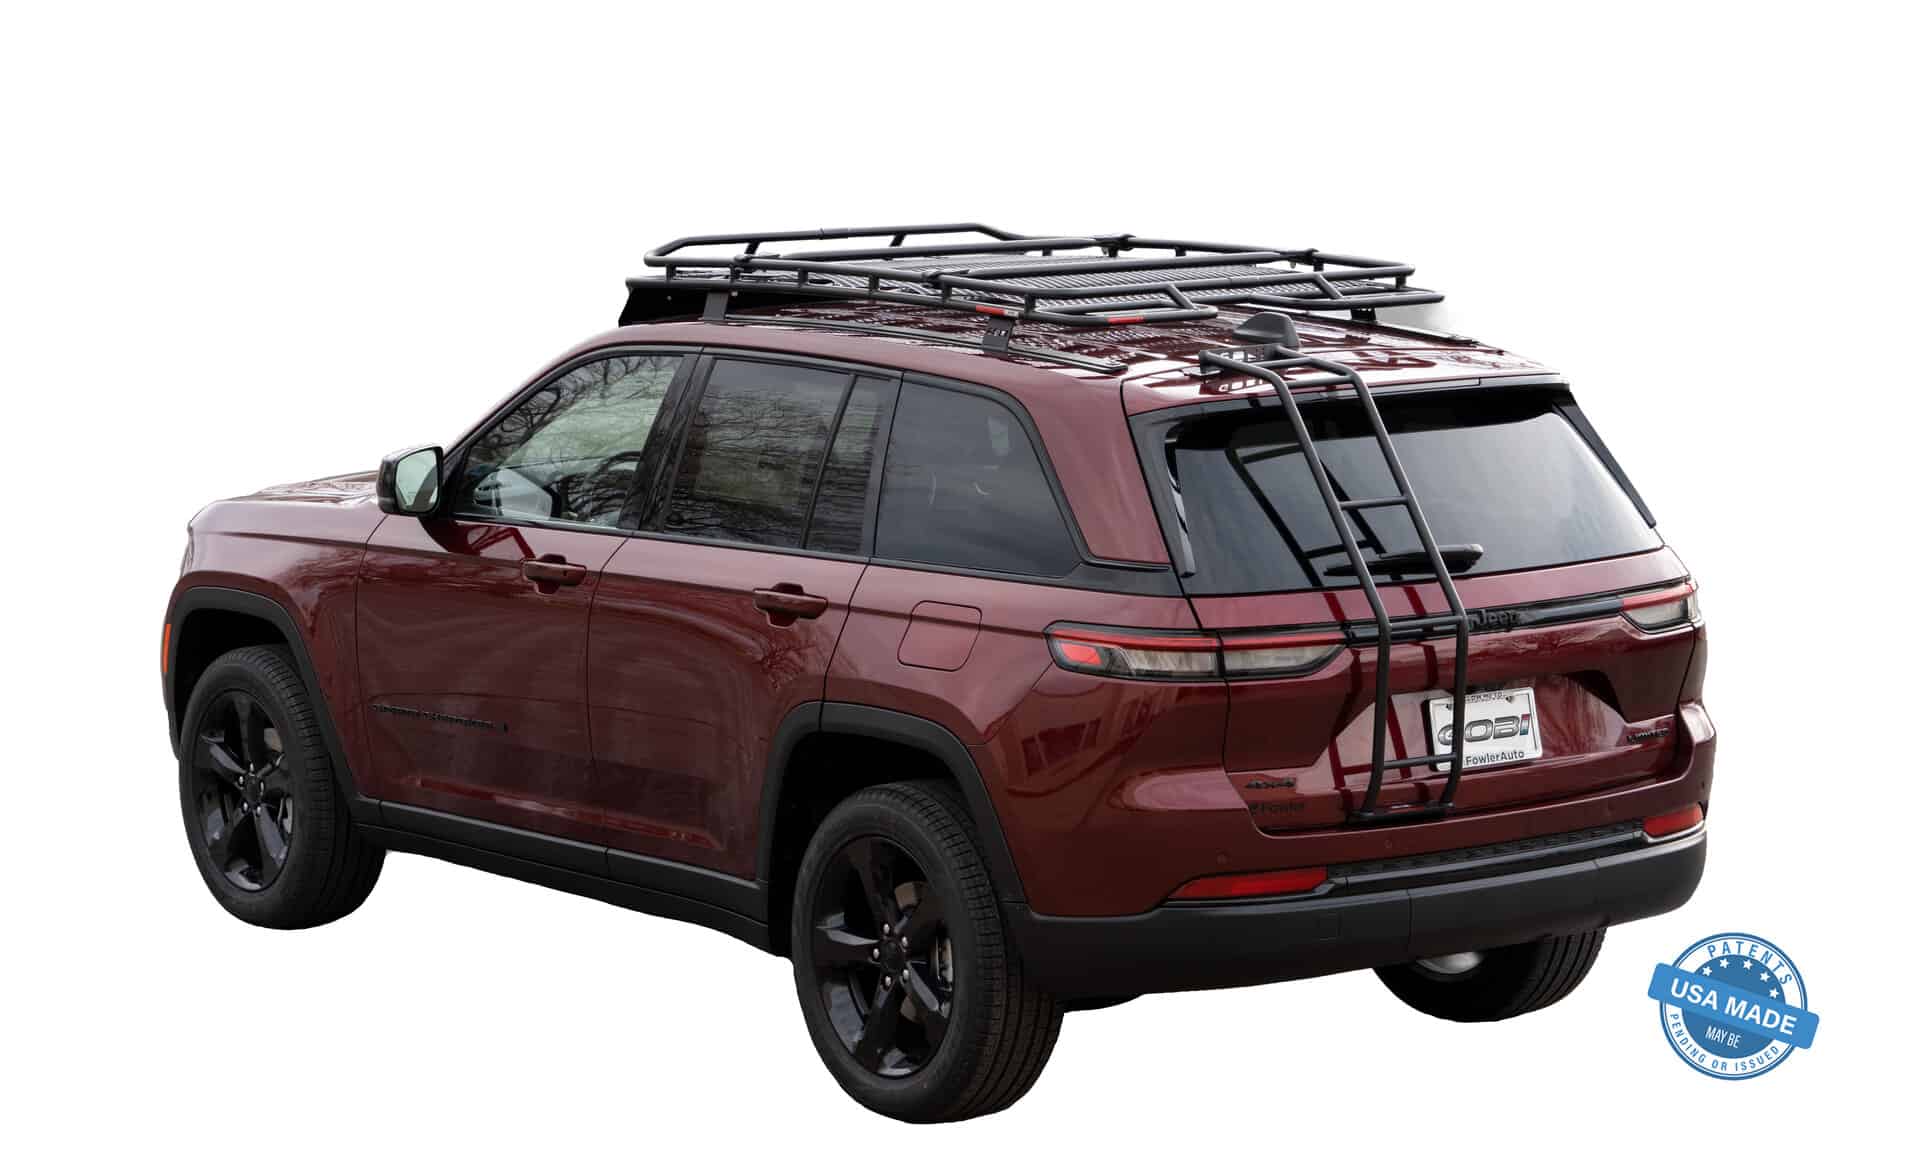 Grandcherokeel back2 <b>jeep grand cherokee 4xe<br></b> low-profile roof rack<font color ="dodgerblue"><br>multi light no sunroof - stealth</font>